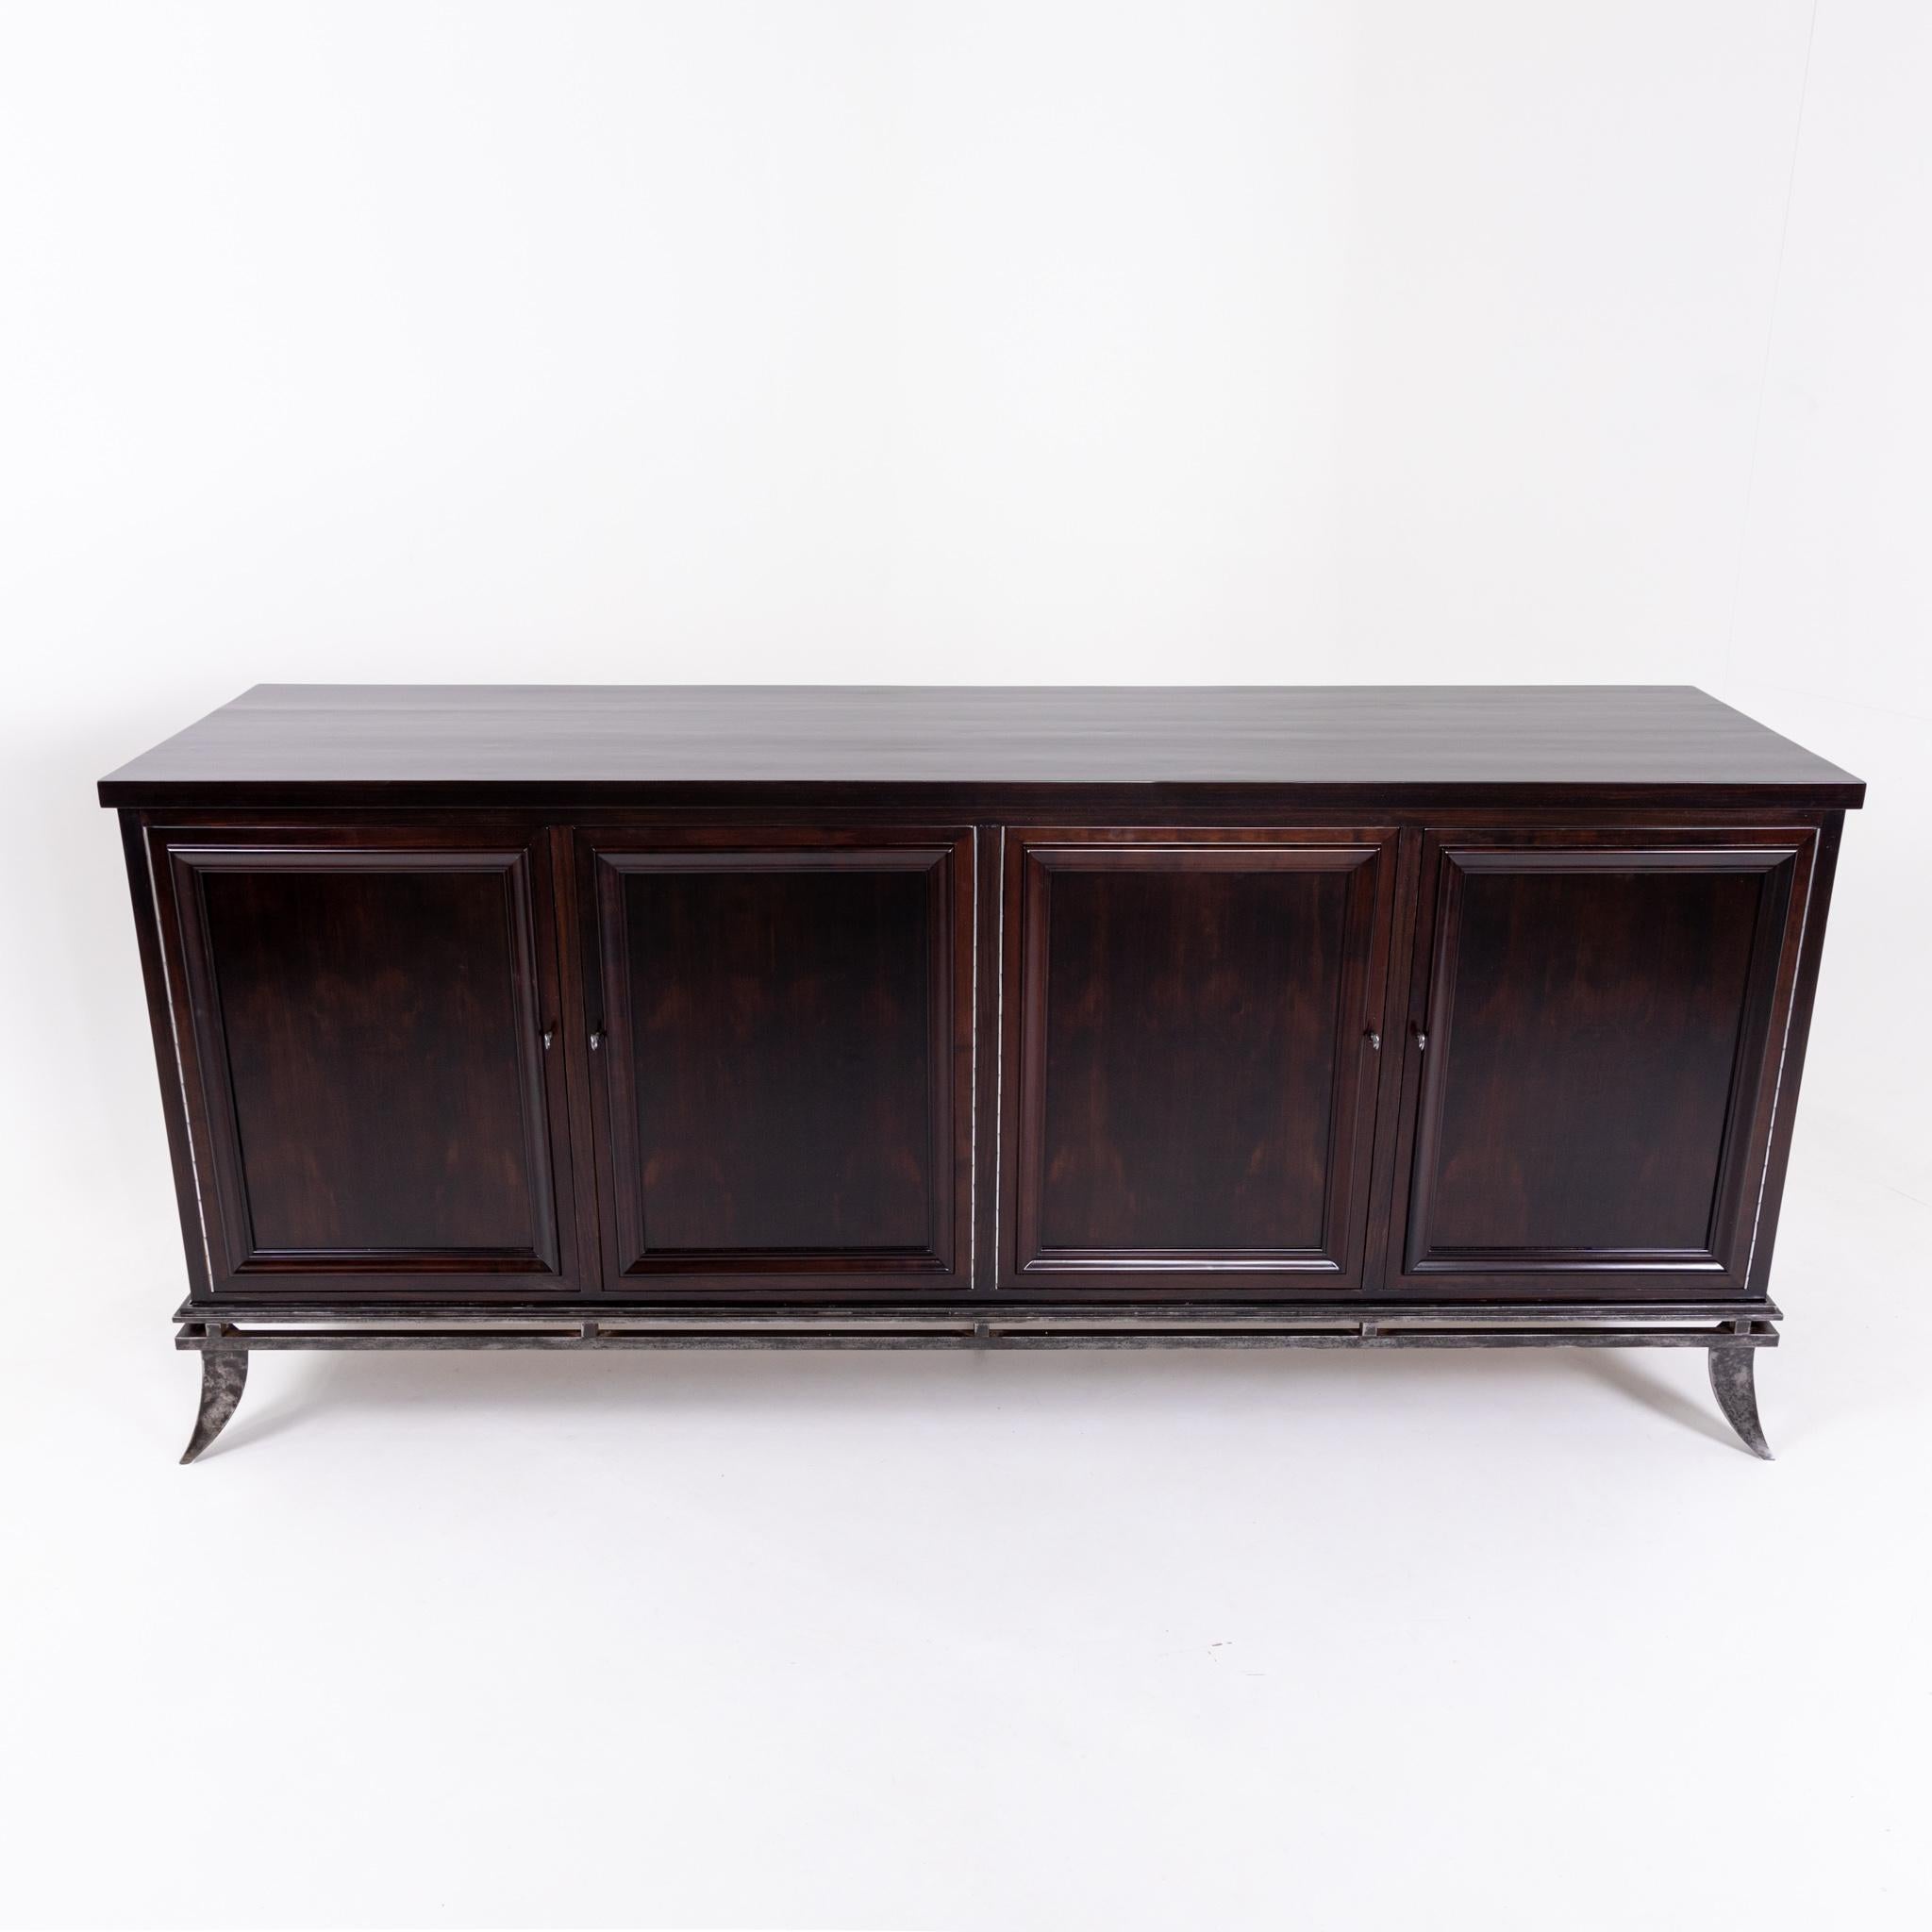 Four-door sideboard on elegant iron frame with flared saber legs. Interior partition consists of shelves and drawers.